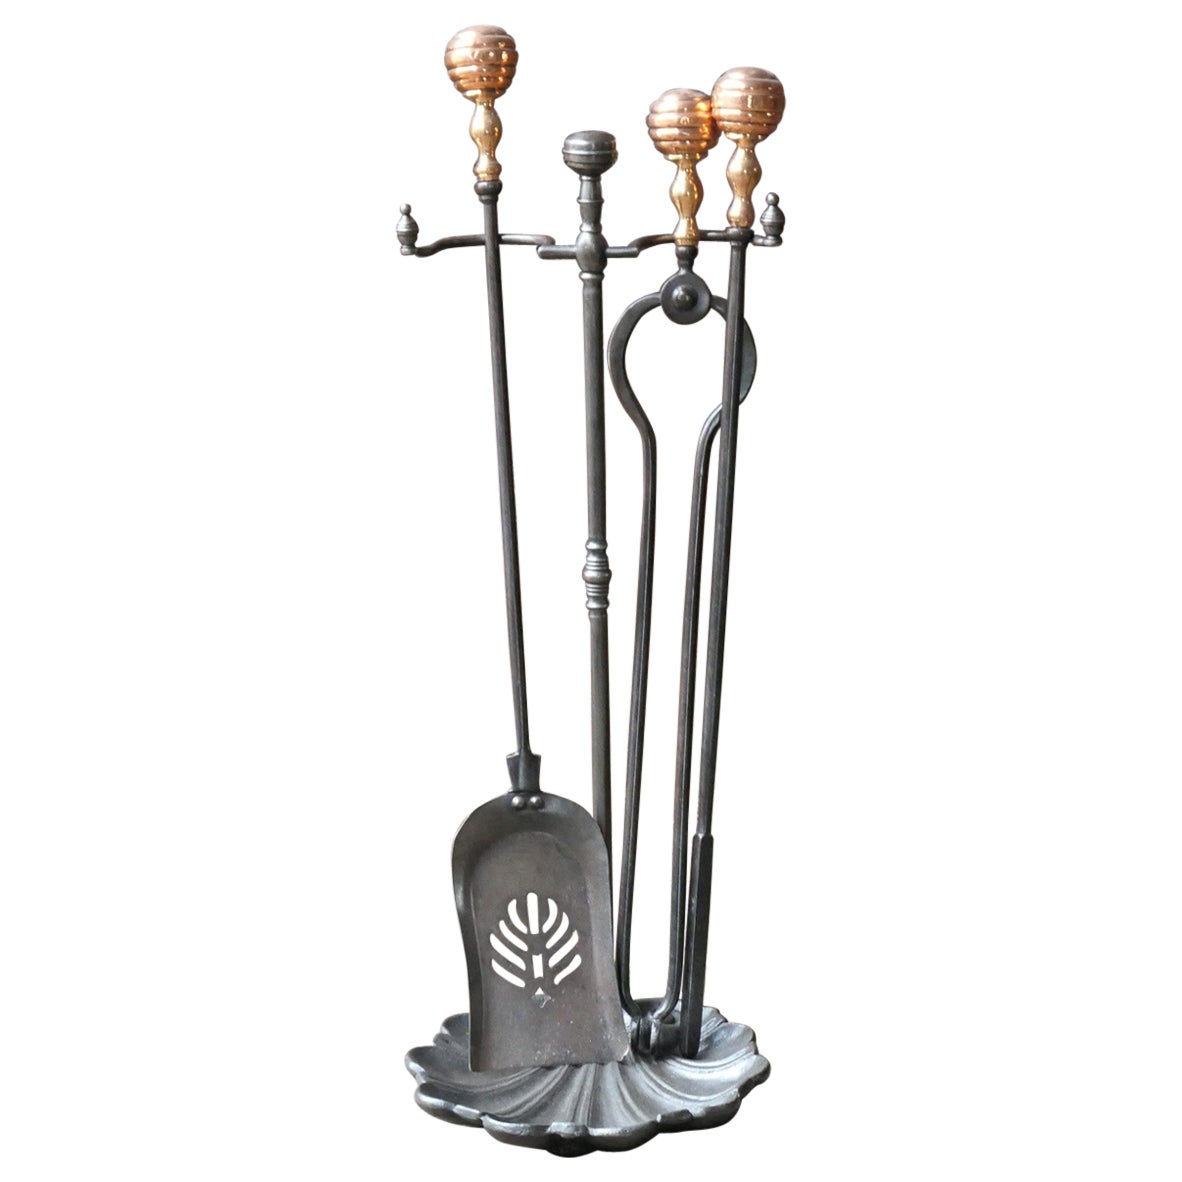 English Victorian Fireplace Tools or Companion Set, 19th Century 